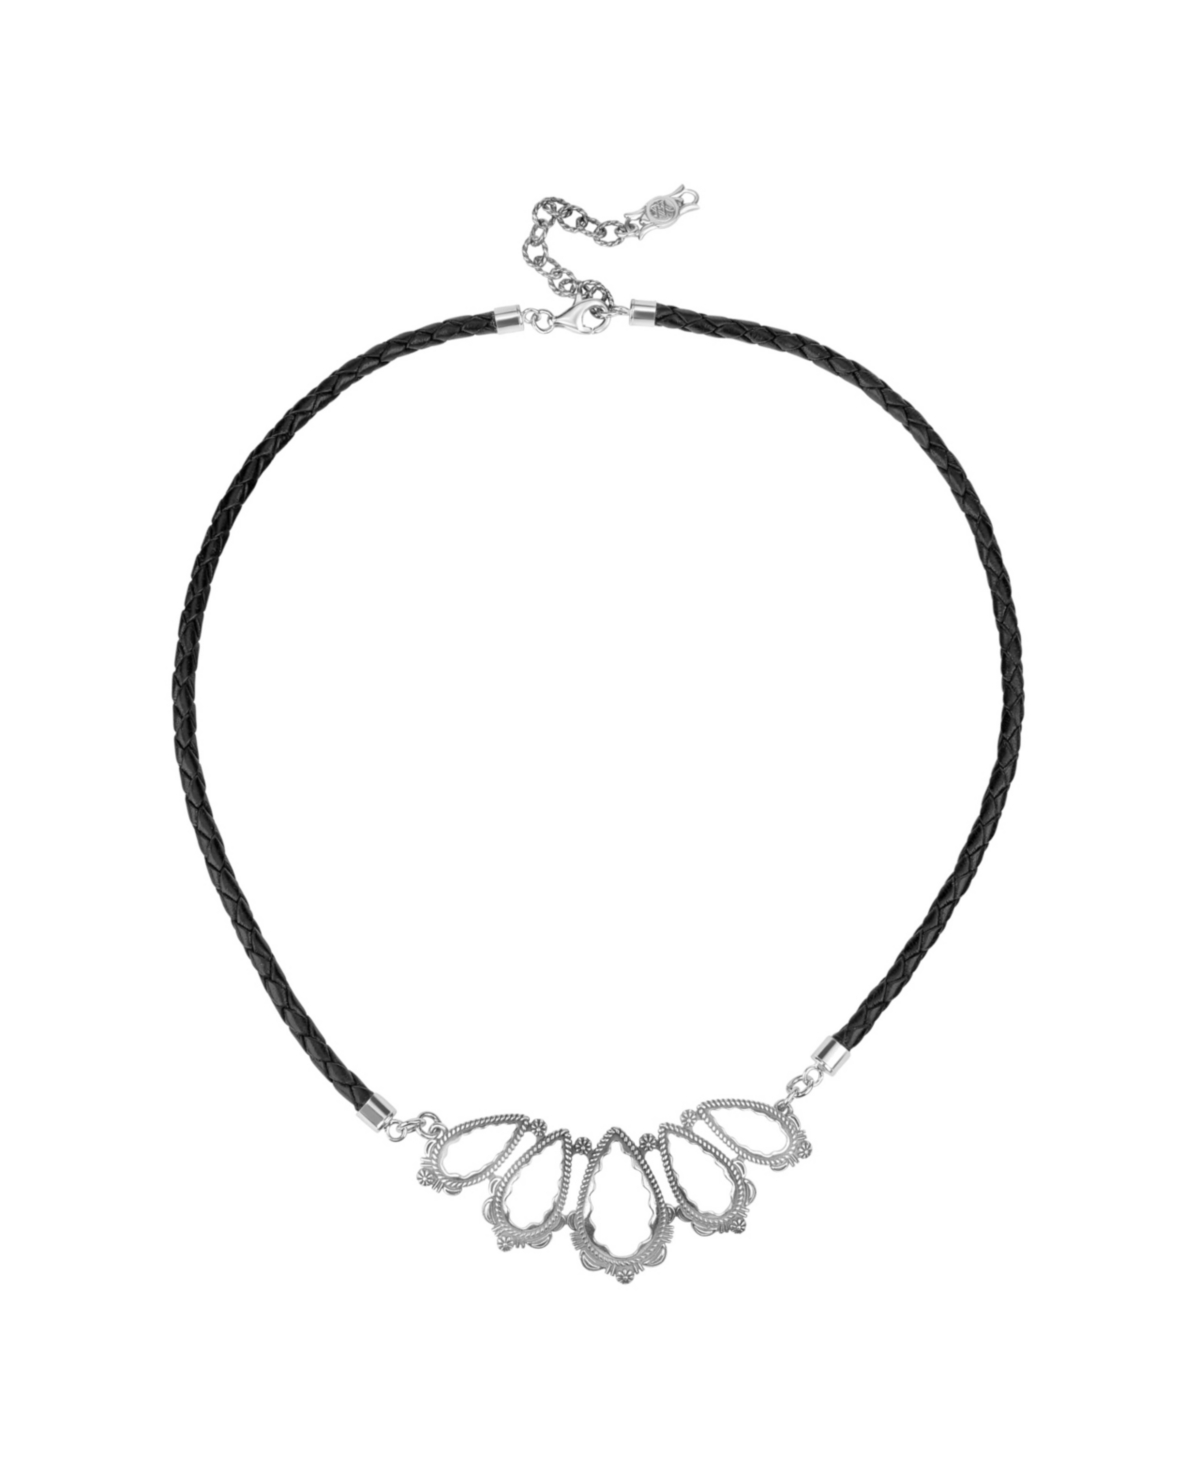 Southwestern Raindrop Necklace-Features Sterling Silver Pendant with 20 Inch Black Leather Cord - Sterling/black leather